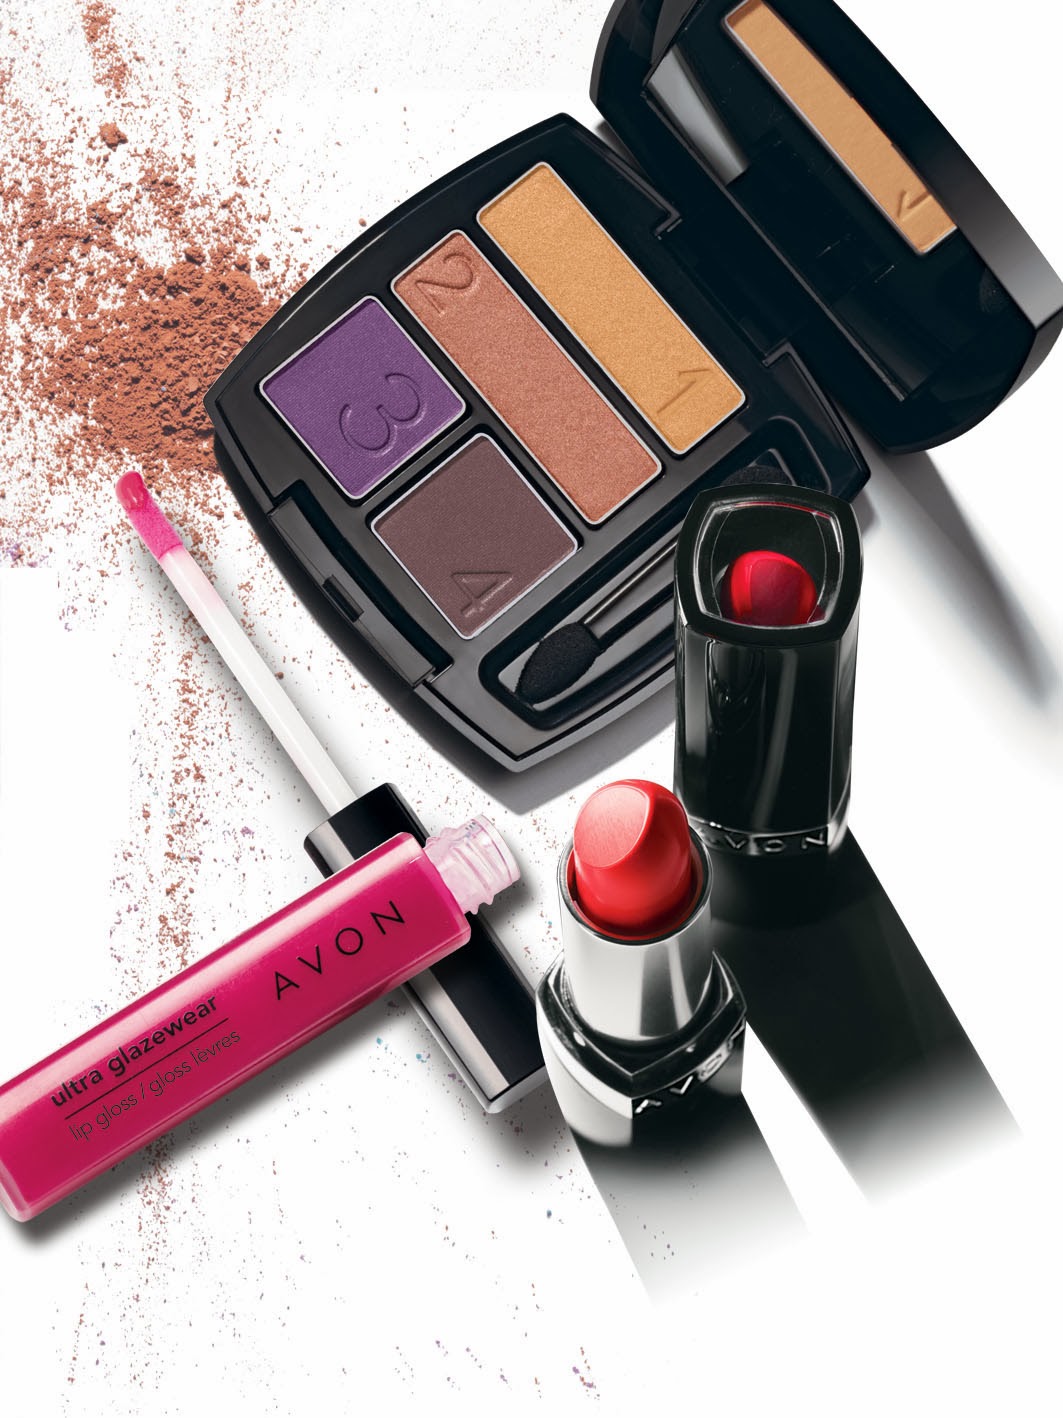 EVERGREEN LOVE: AVON New Makeup Collection